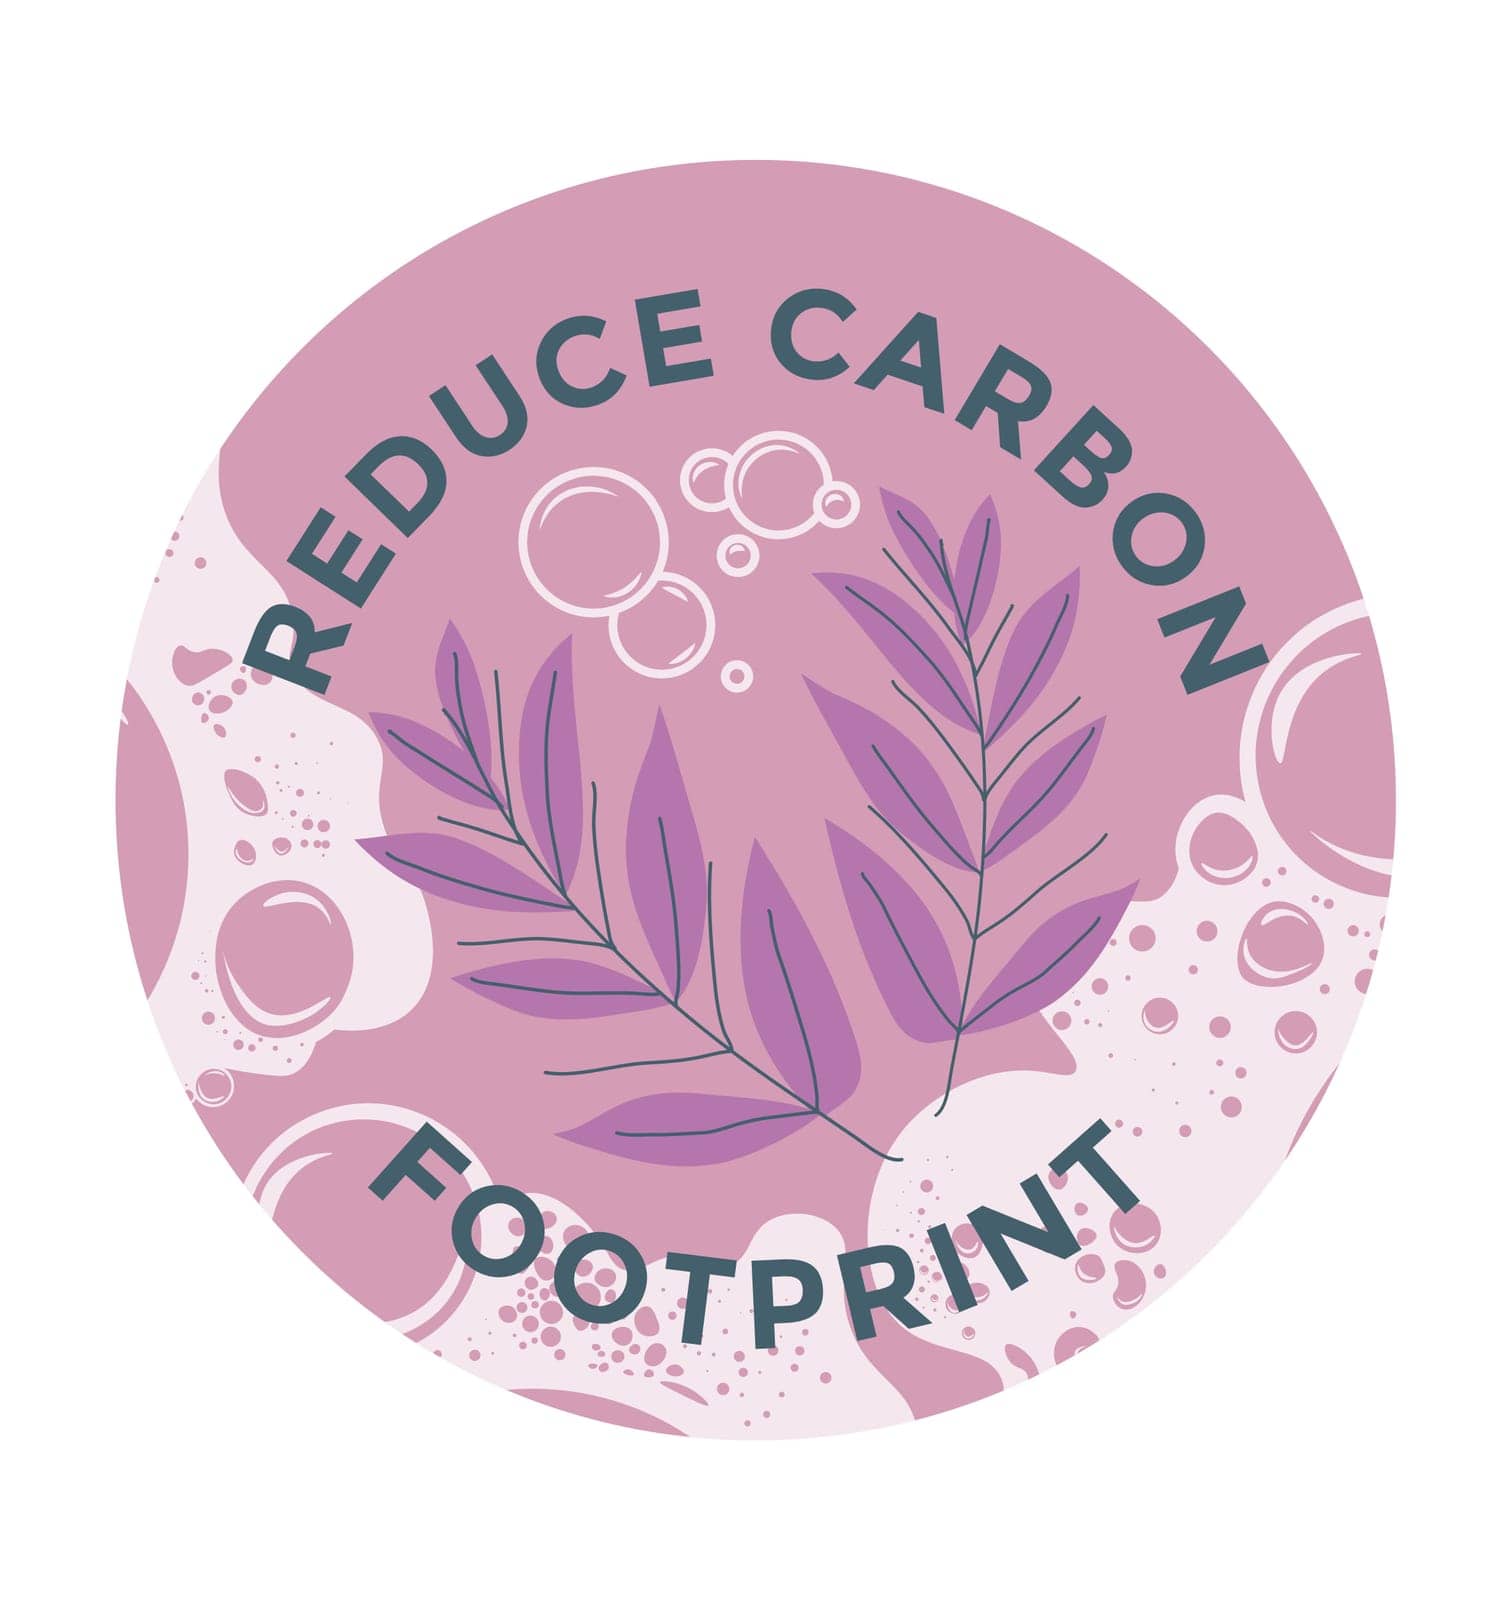 Reduce carbon footprint with eco detergent vector by Sonulkaster